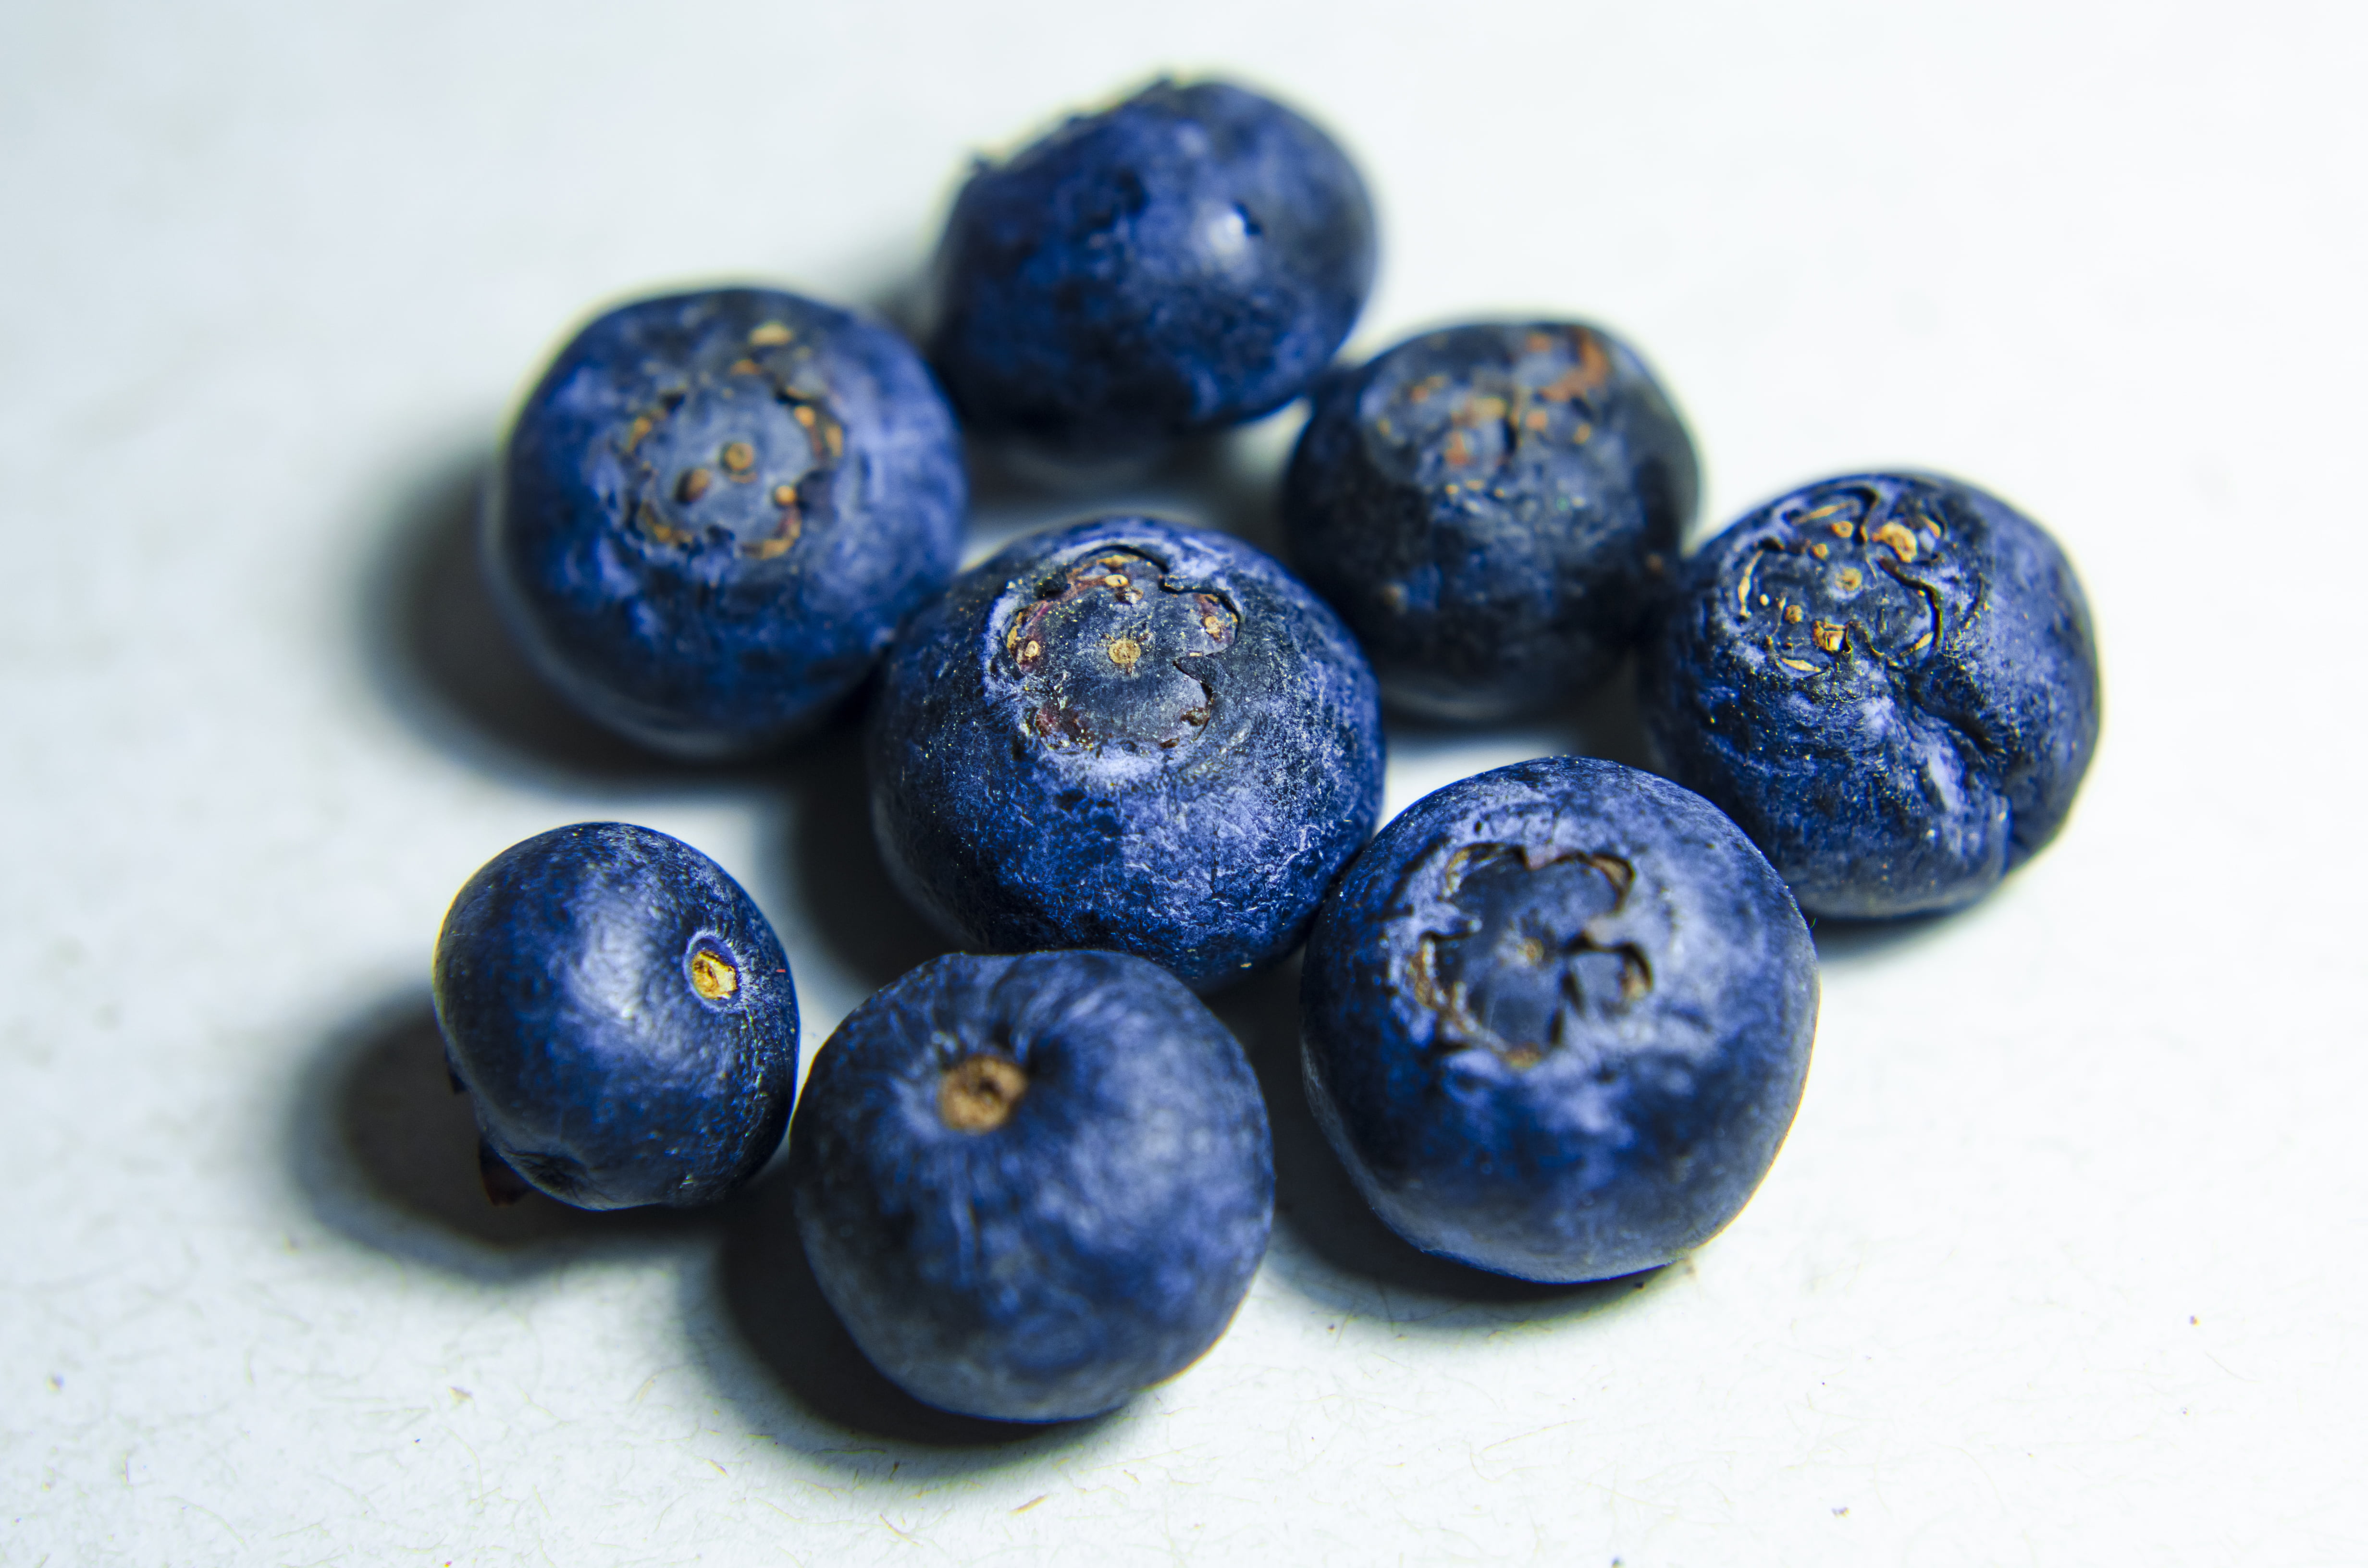 blueberry fruit, blueberries, close-up, food, food and drink